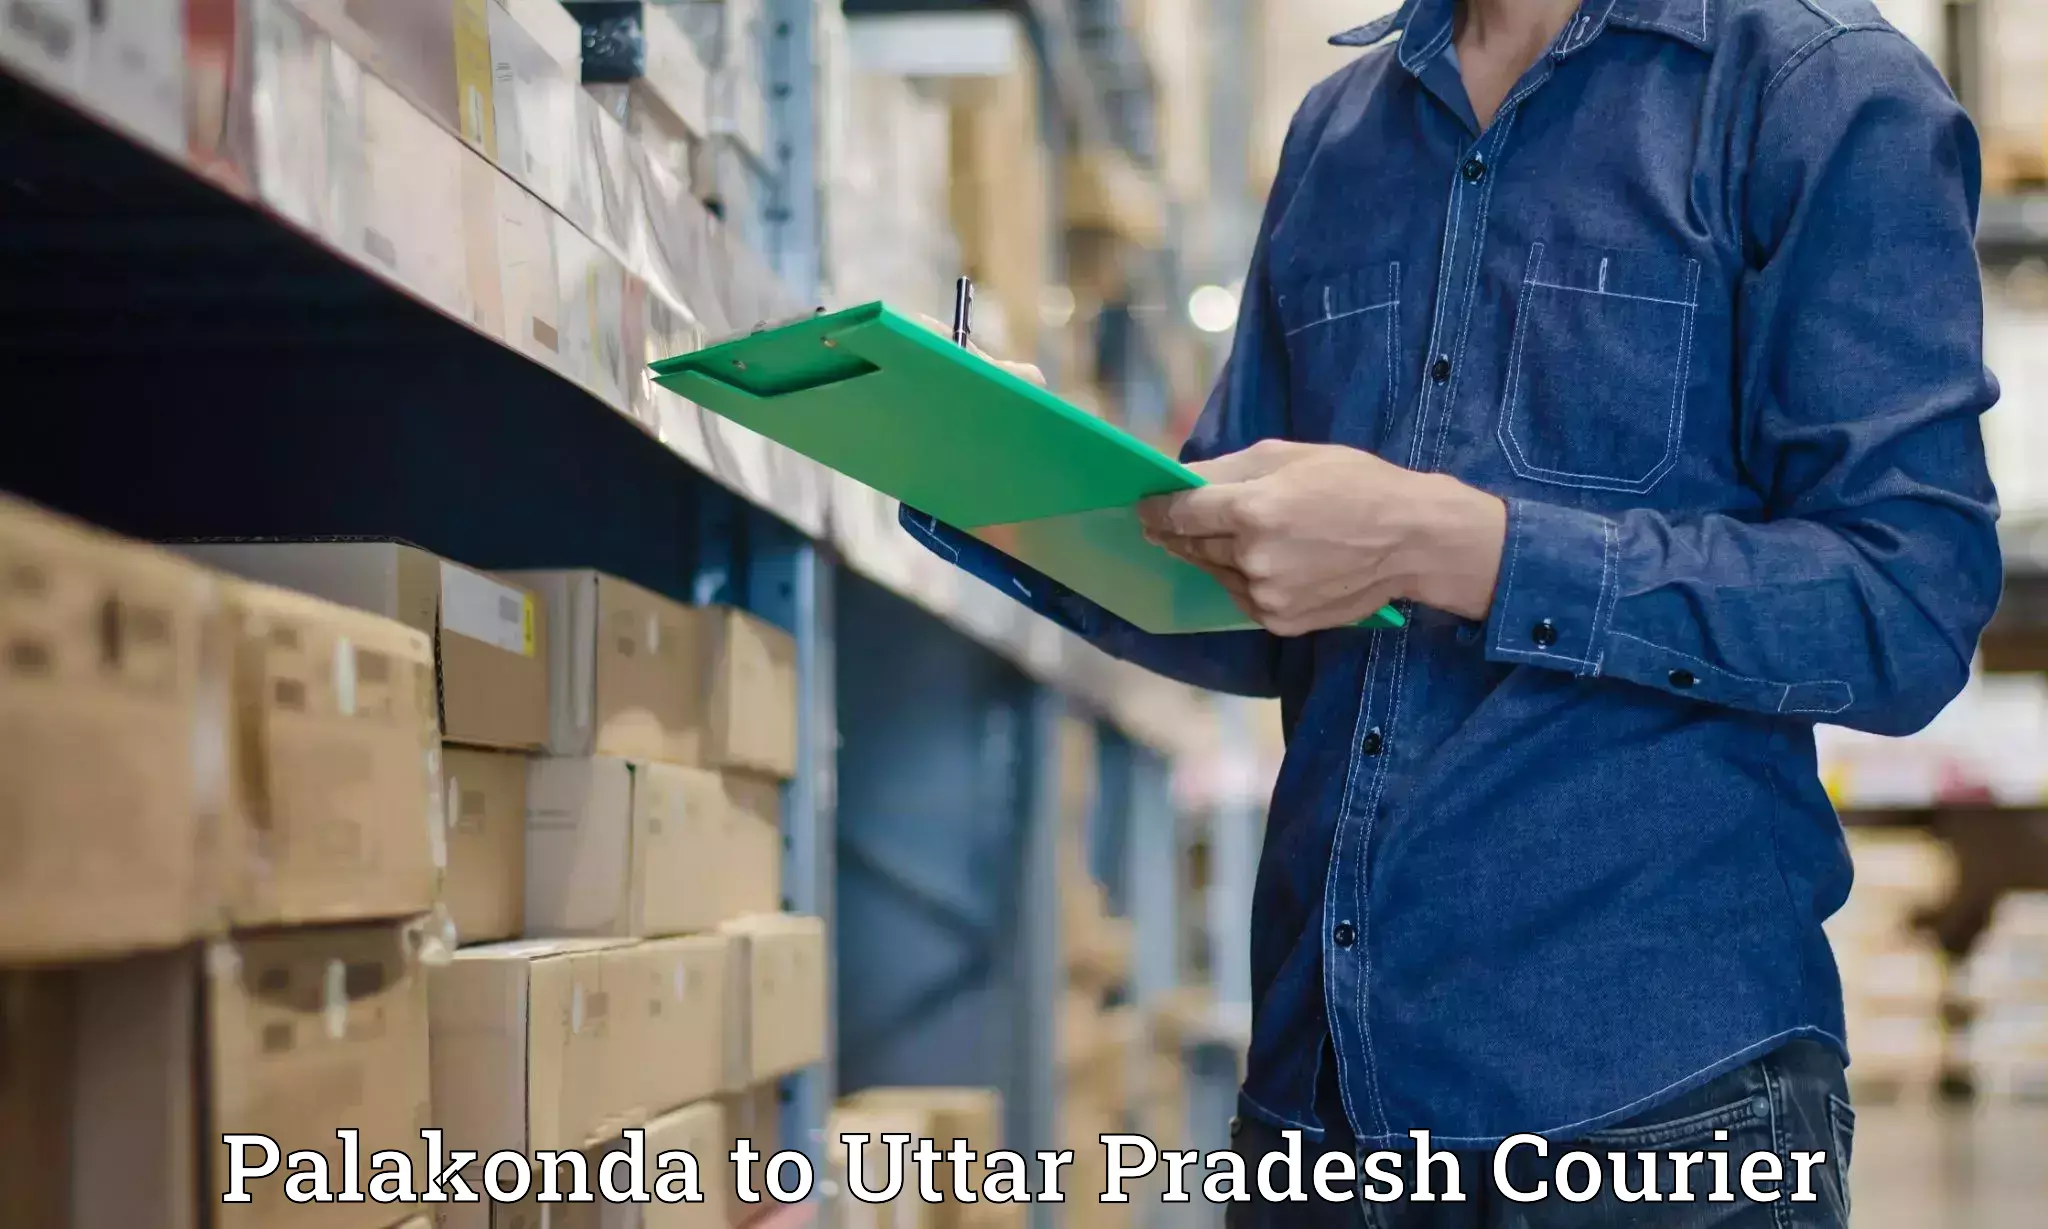 Efficient parcel tracking in Palakonda to Lucknow